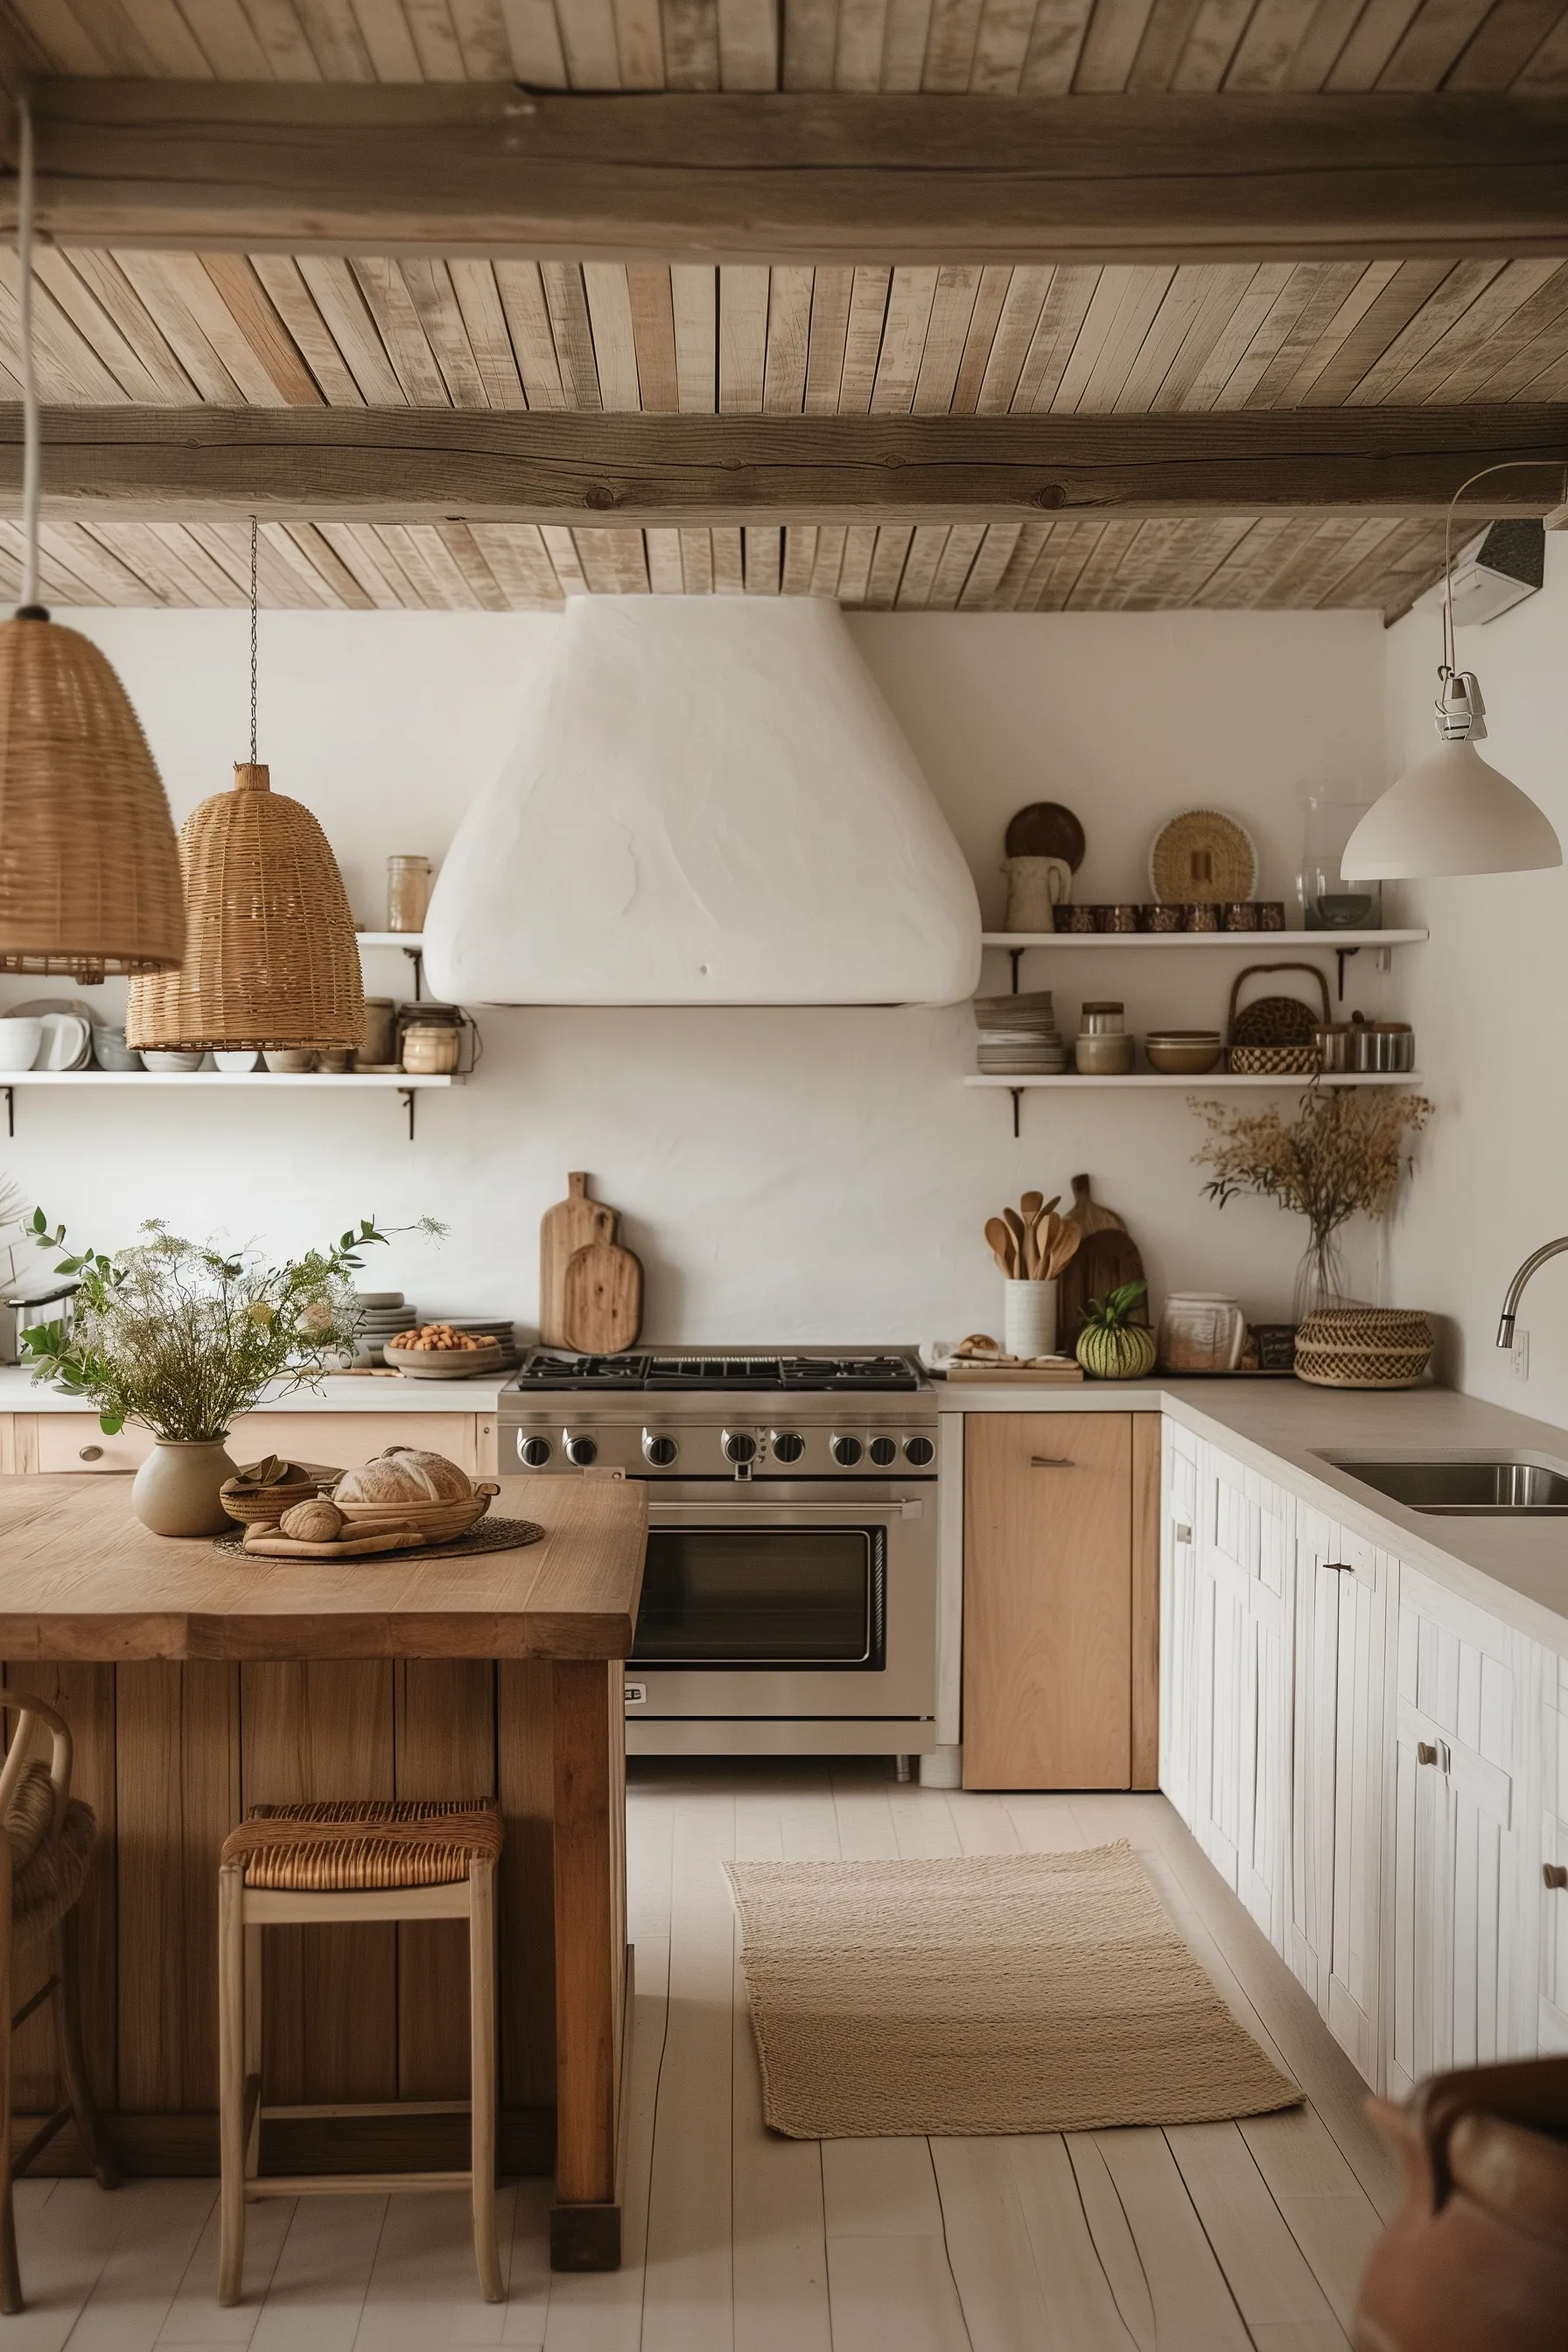 A modern kitchen with small Bohemian accents like a Bohemian rug